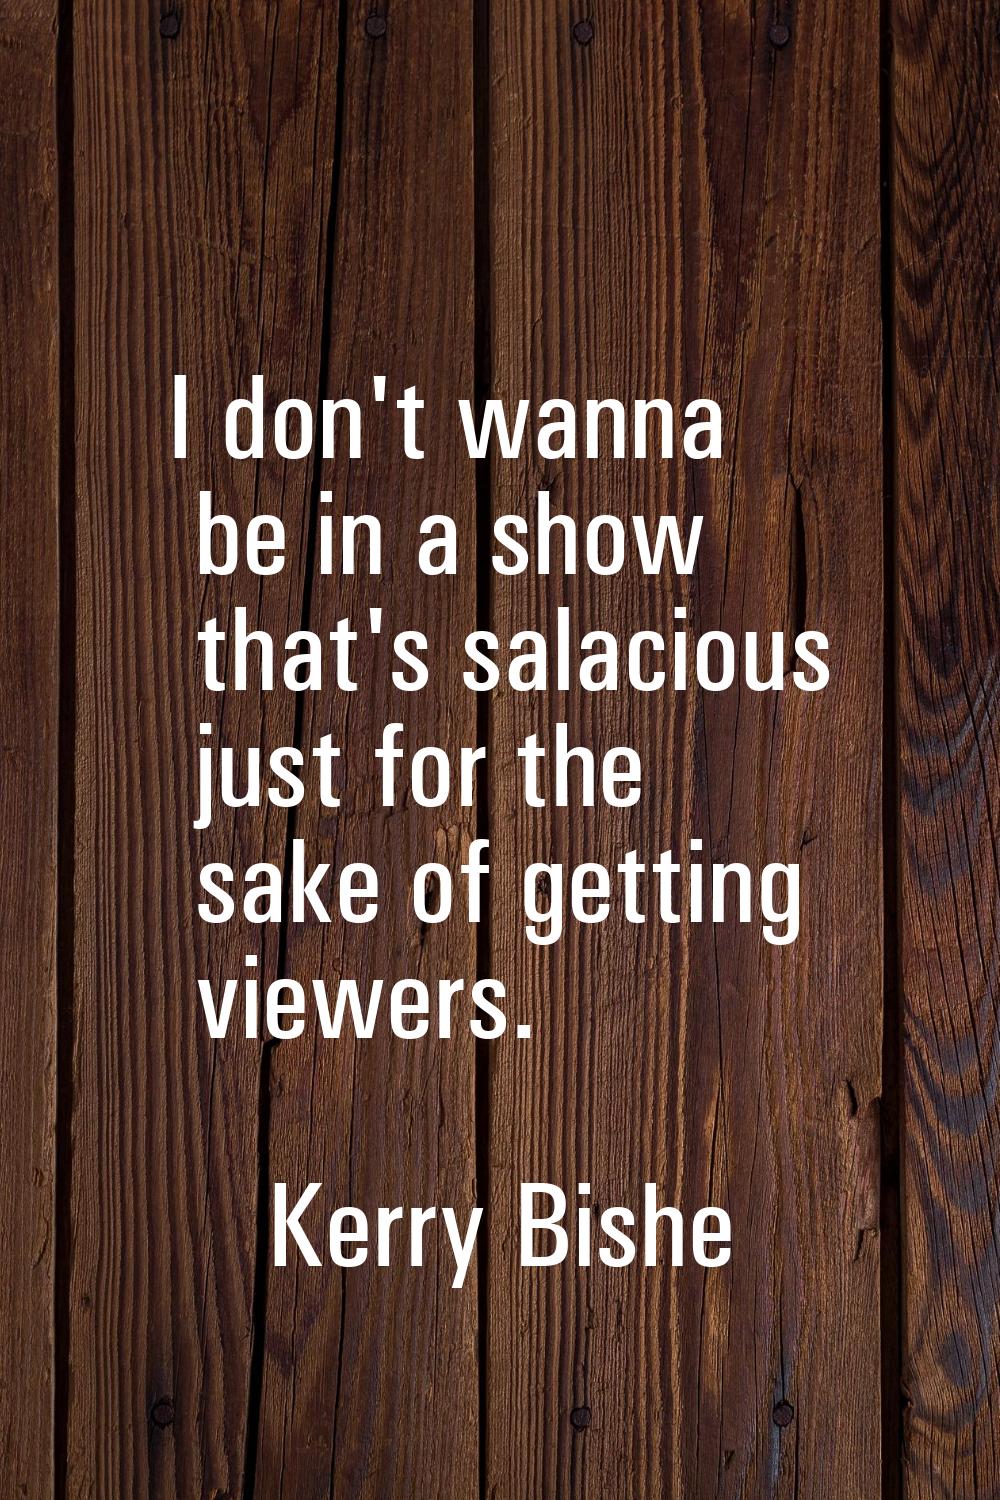 I don't wanna be in a show that's salacious just for the sake of getting viewers.